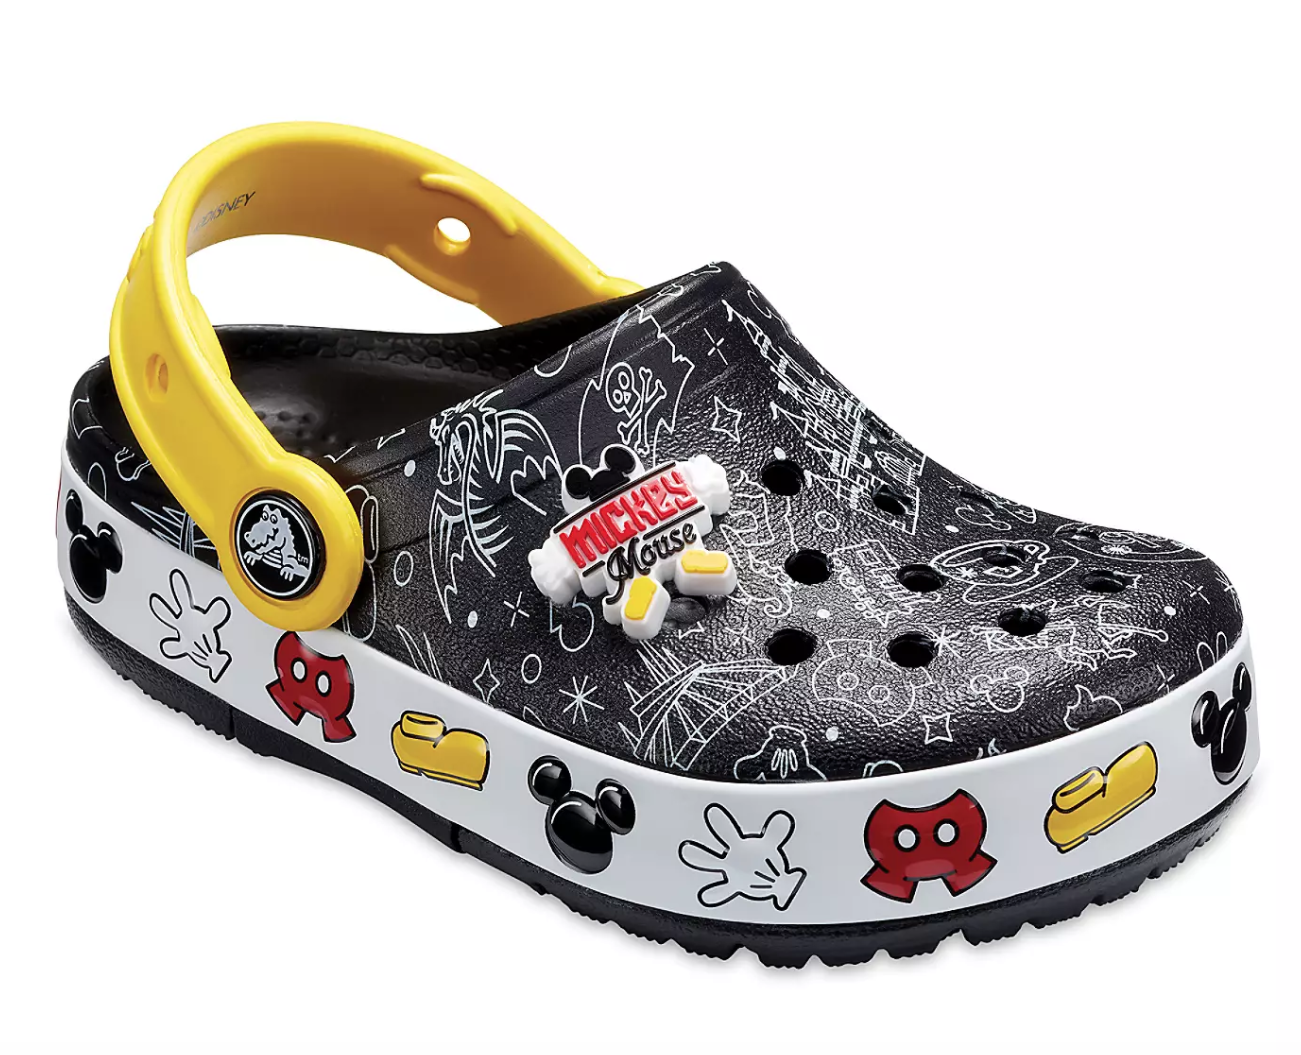 These New Disney and 'Star Wars' Crocs Will Give Your Kids' Park Gear a  MAGICAL Update! - AllEars.Net